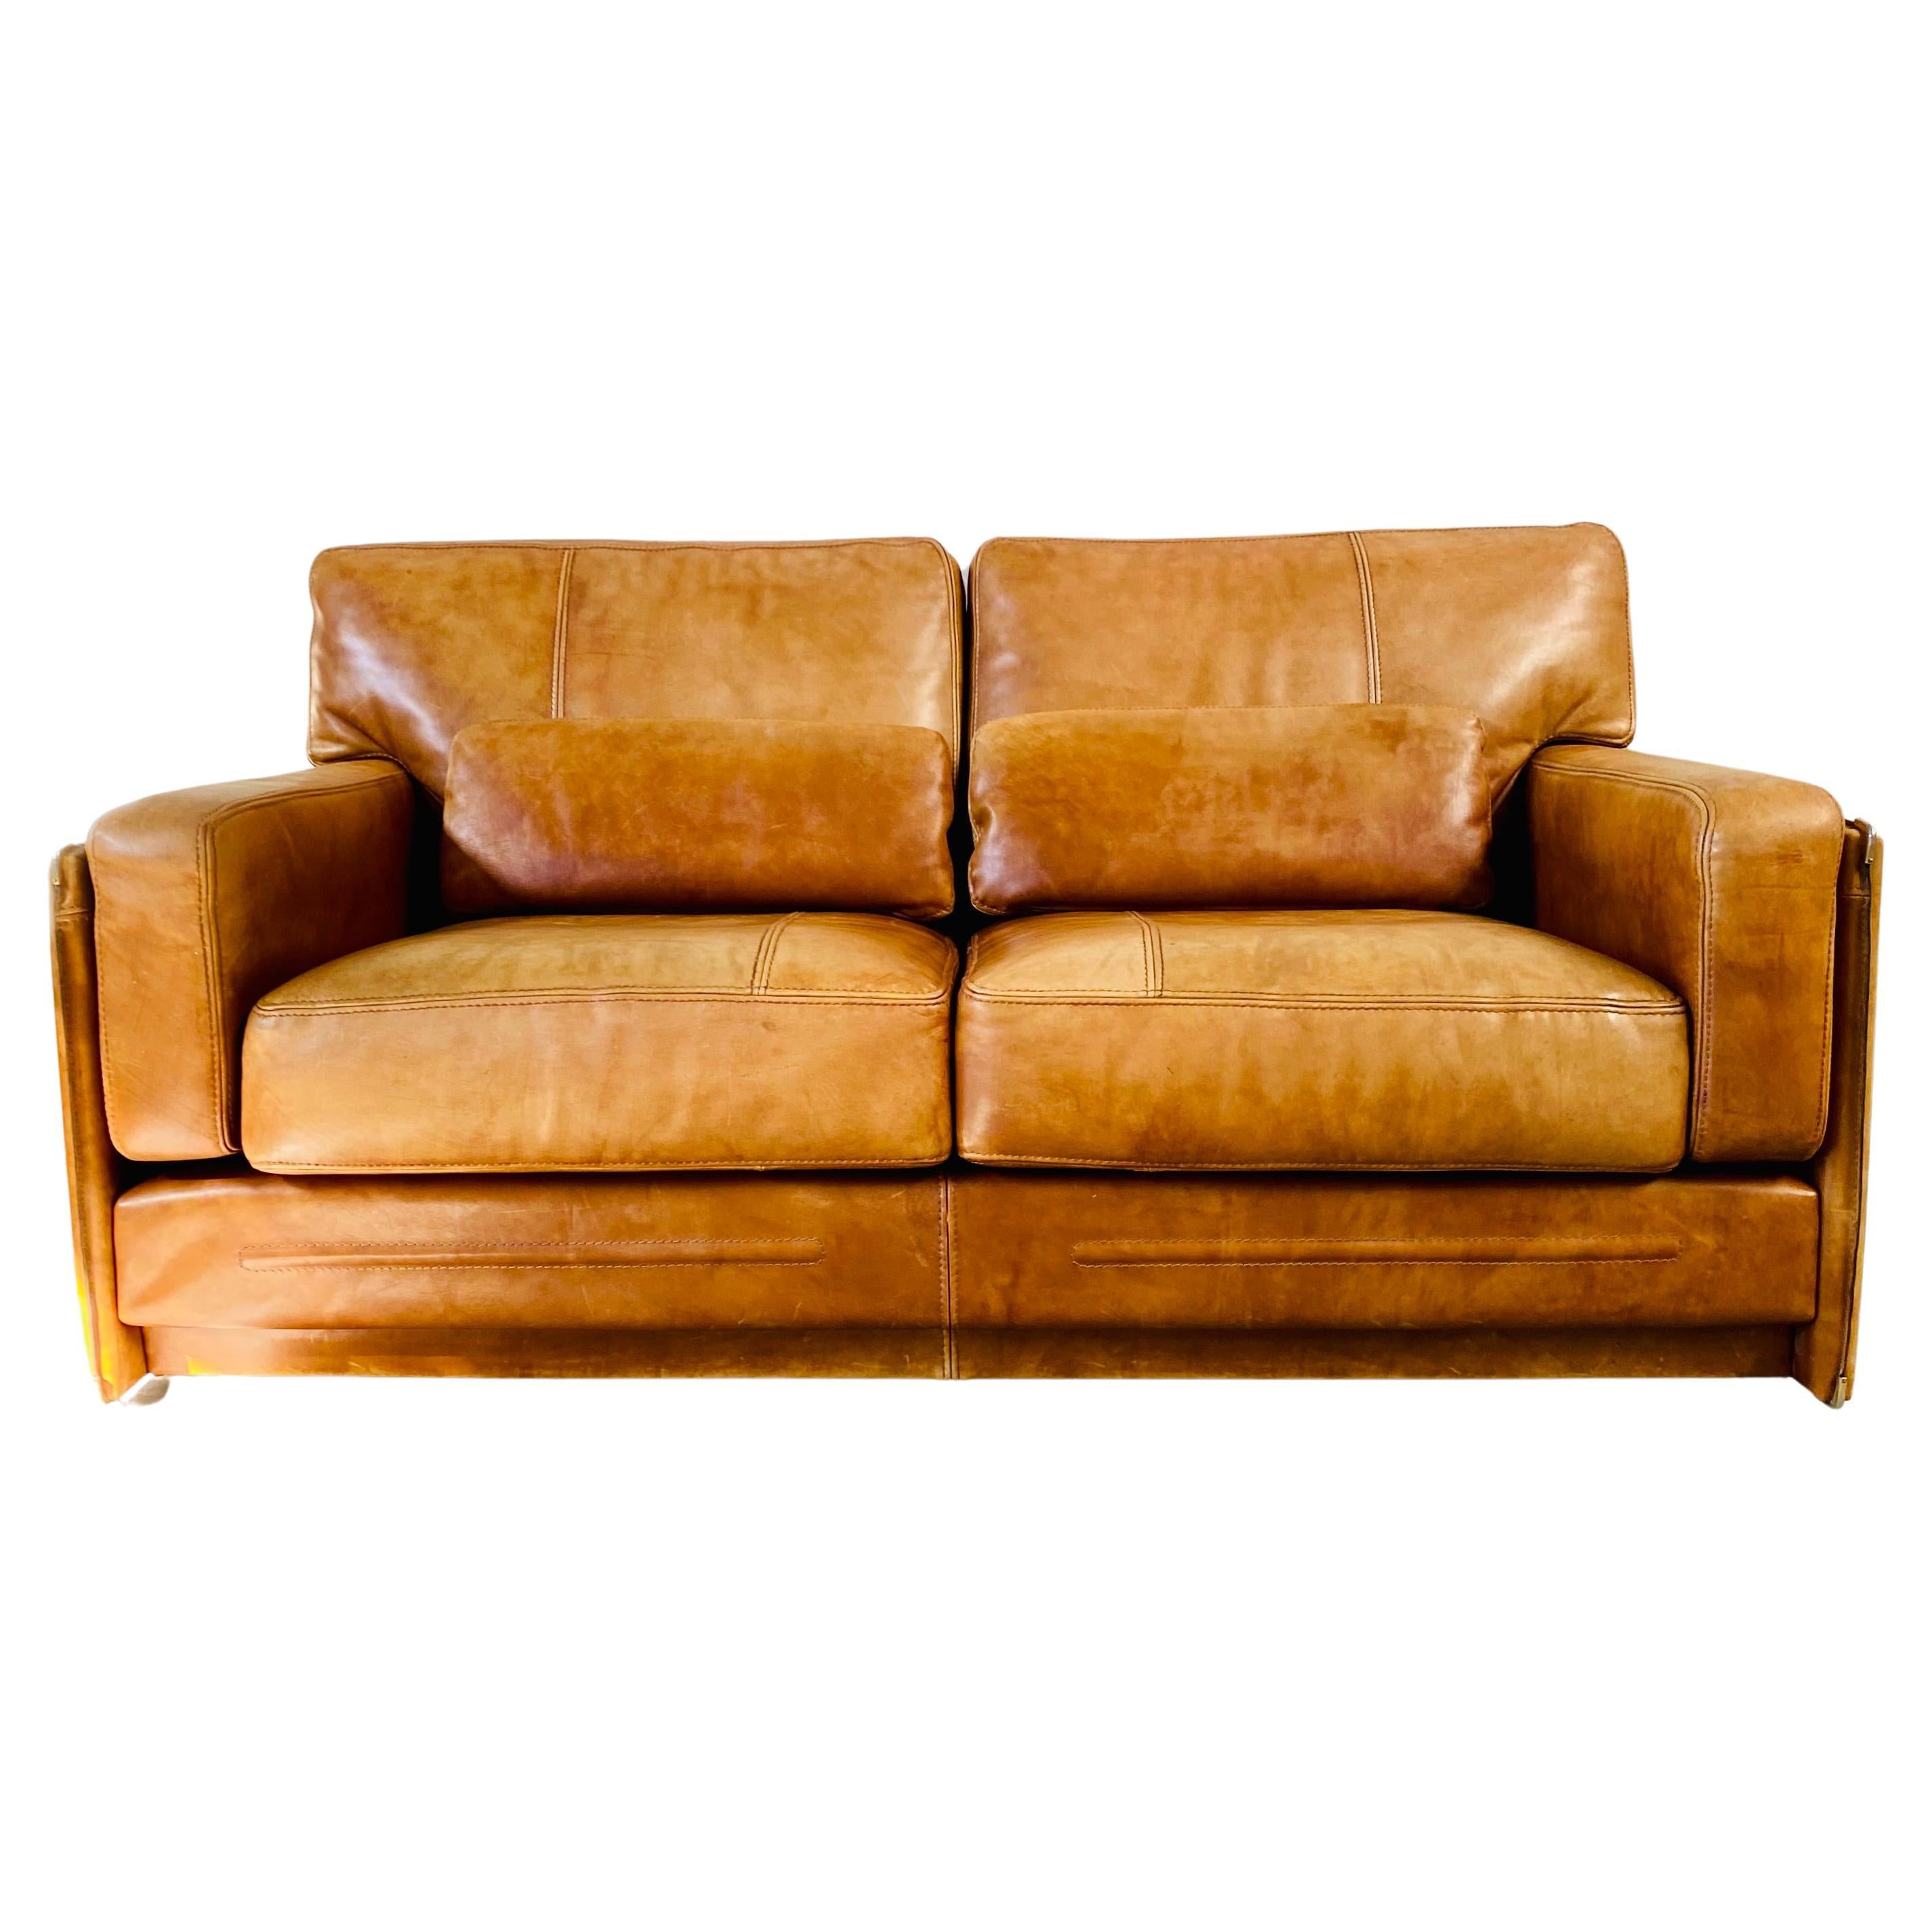 Cognac Leather 2-Seater Sofa by MarCo Milisich for Baxter, Italy, 1970 For Sale